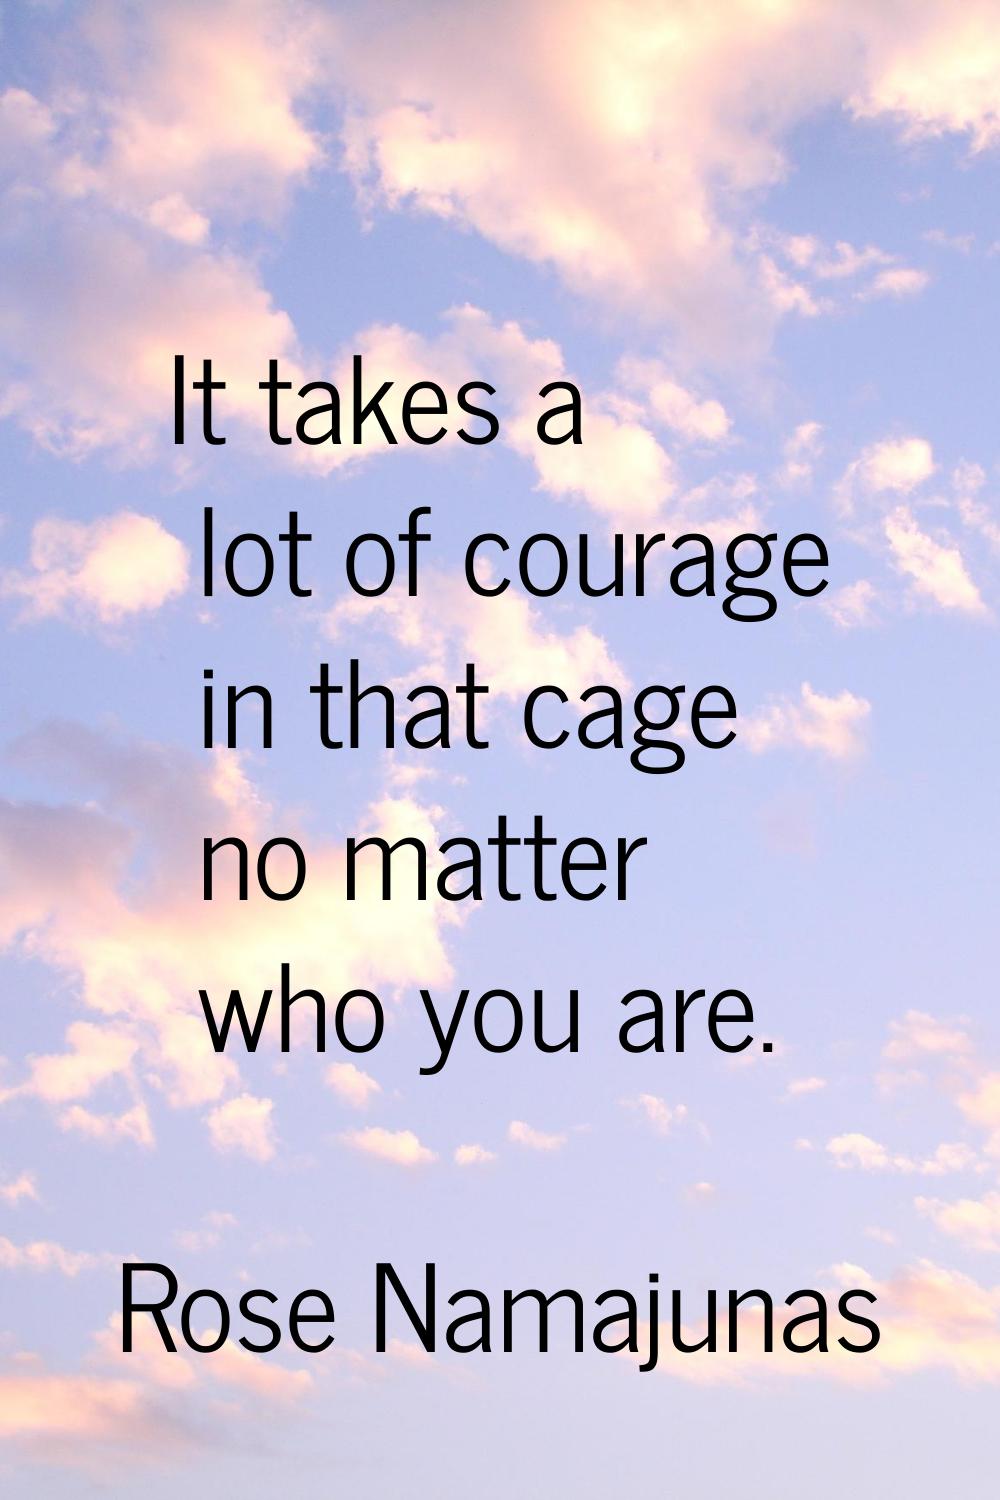 It takes a lot of courage in that cage no matter who you are.